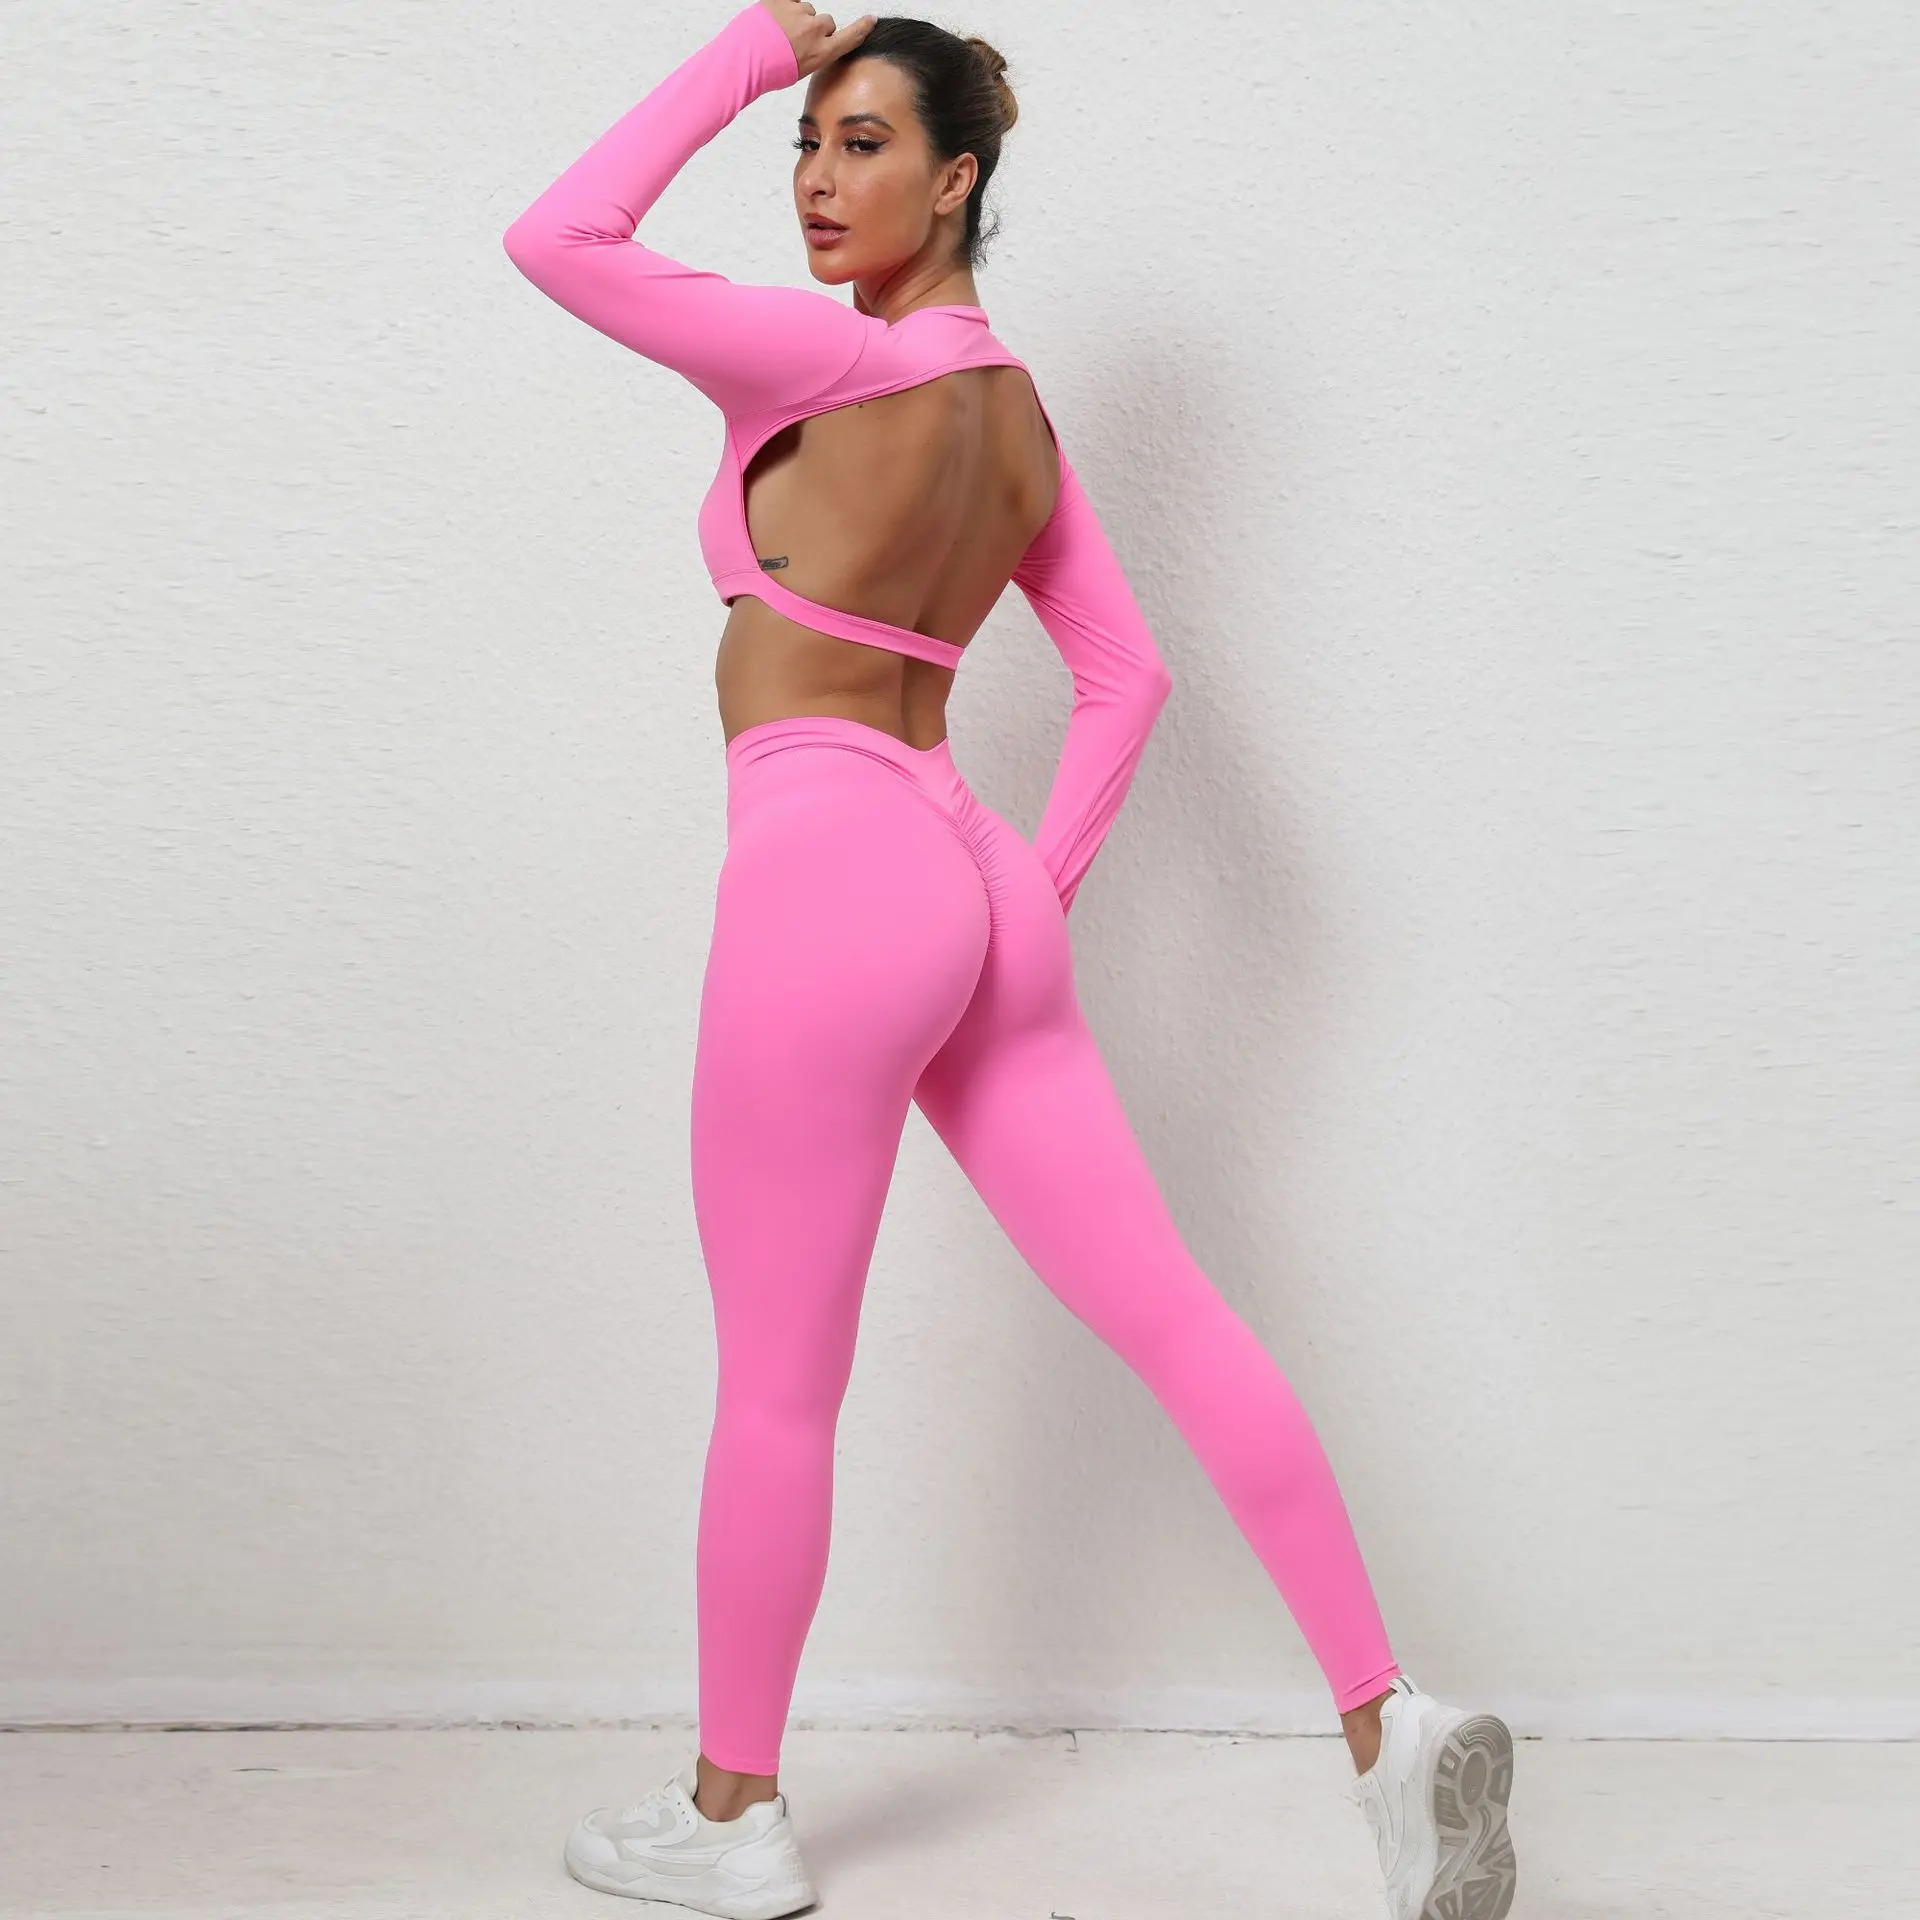 Spicy Girls Open Back Long Sleeve Top and Yoga Pants, Quick Dried Sports Set, Tight, Nude, Sexy, Fashion women s zipper high neck long sleeve tight yoga fitness bodysuit sports style shorts fashion